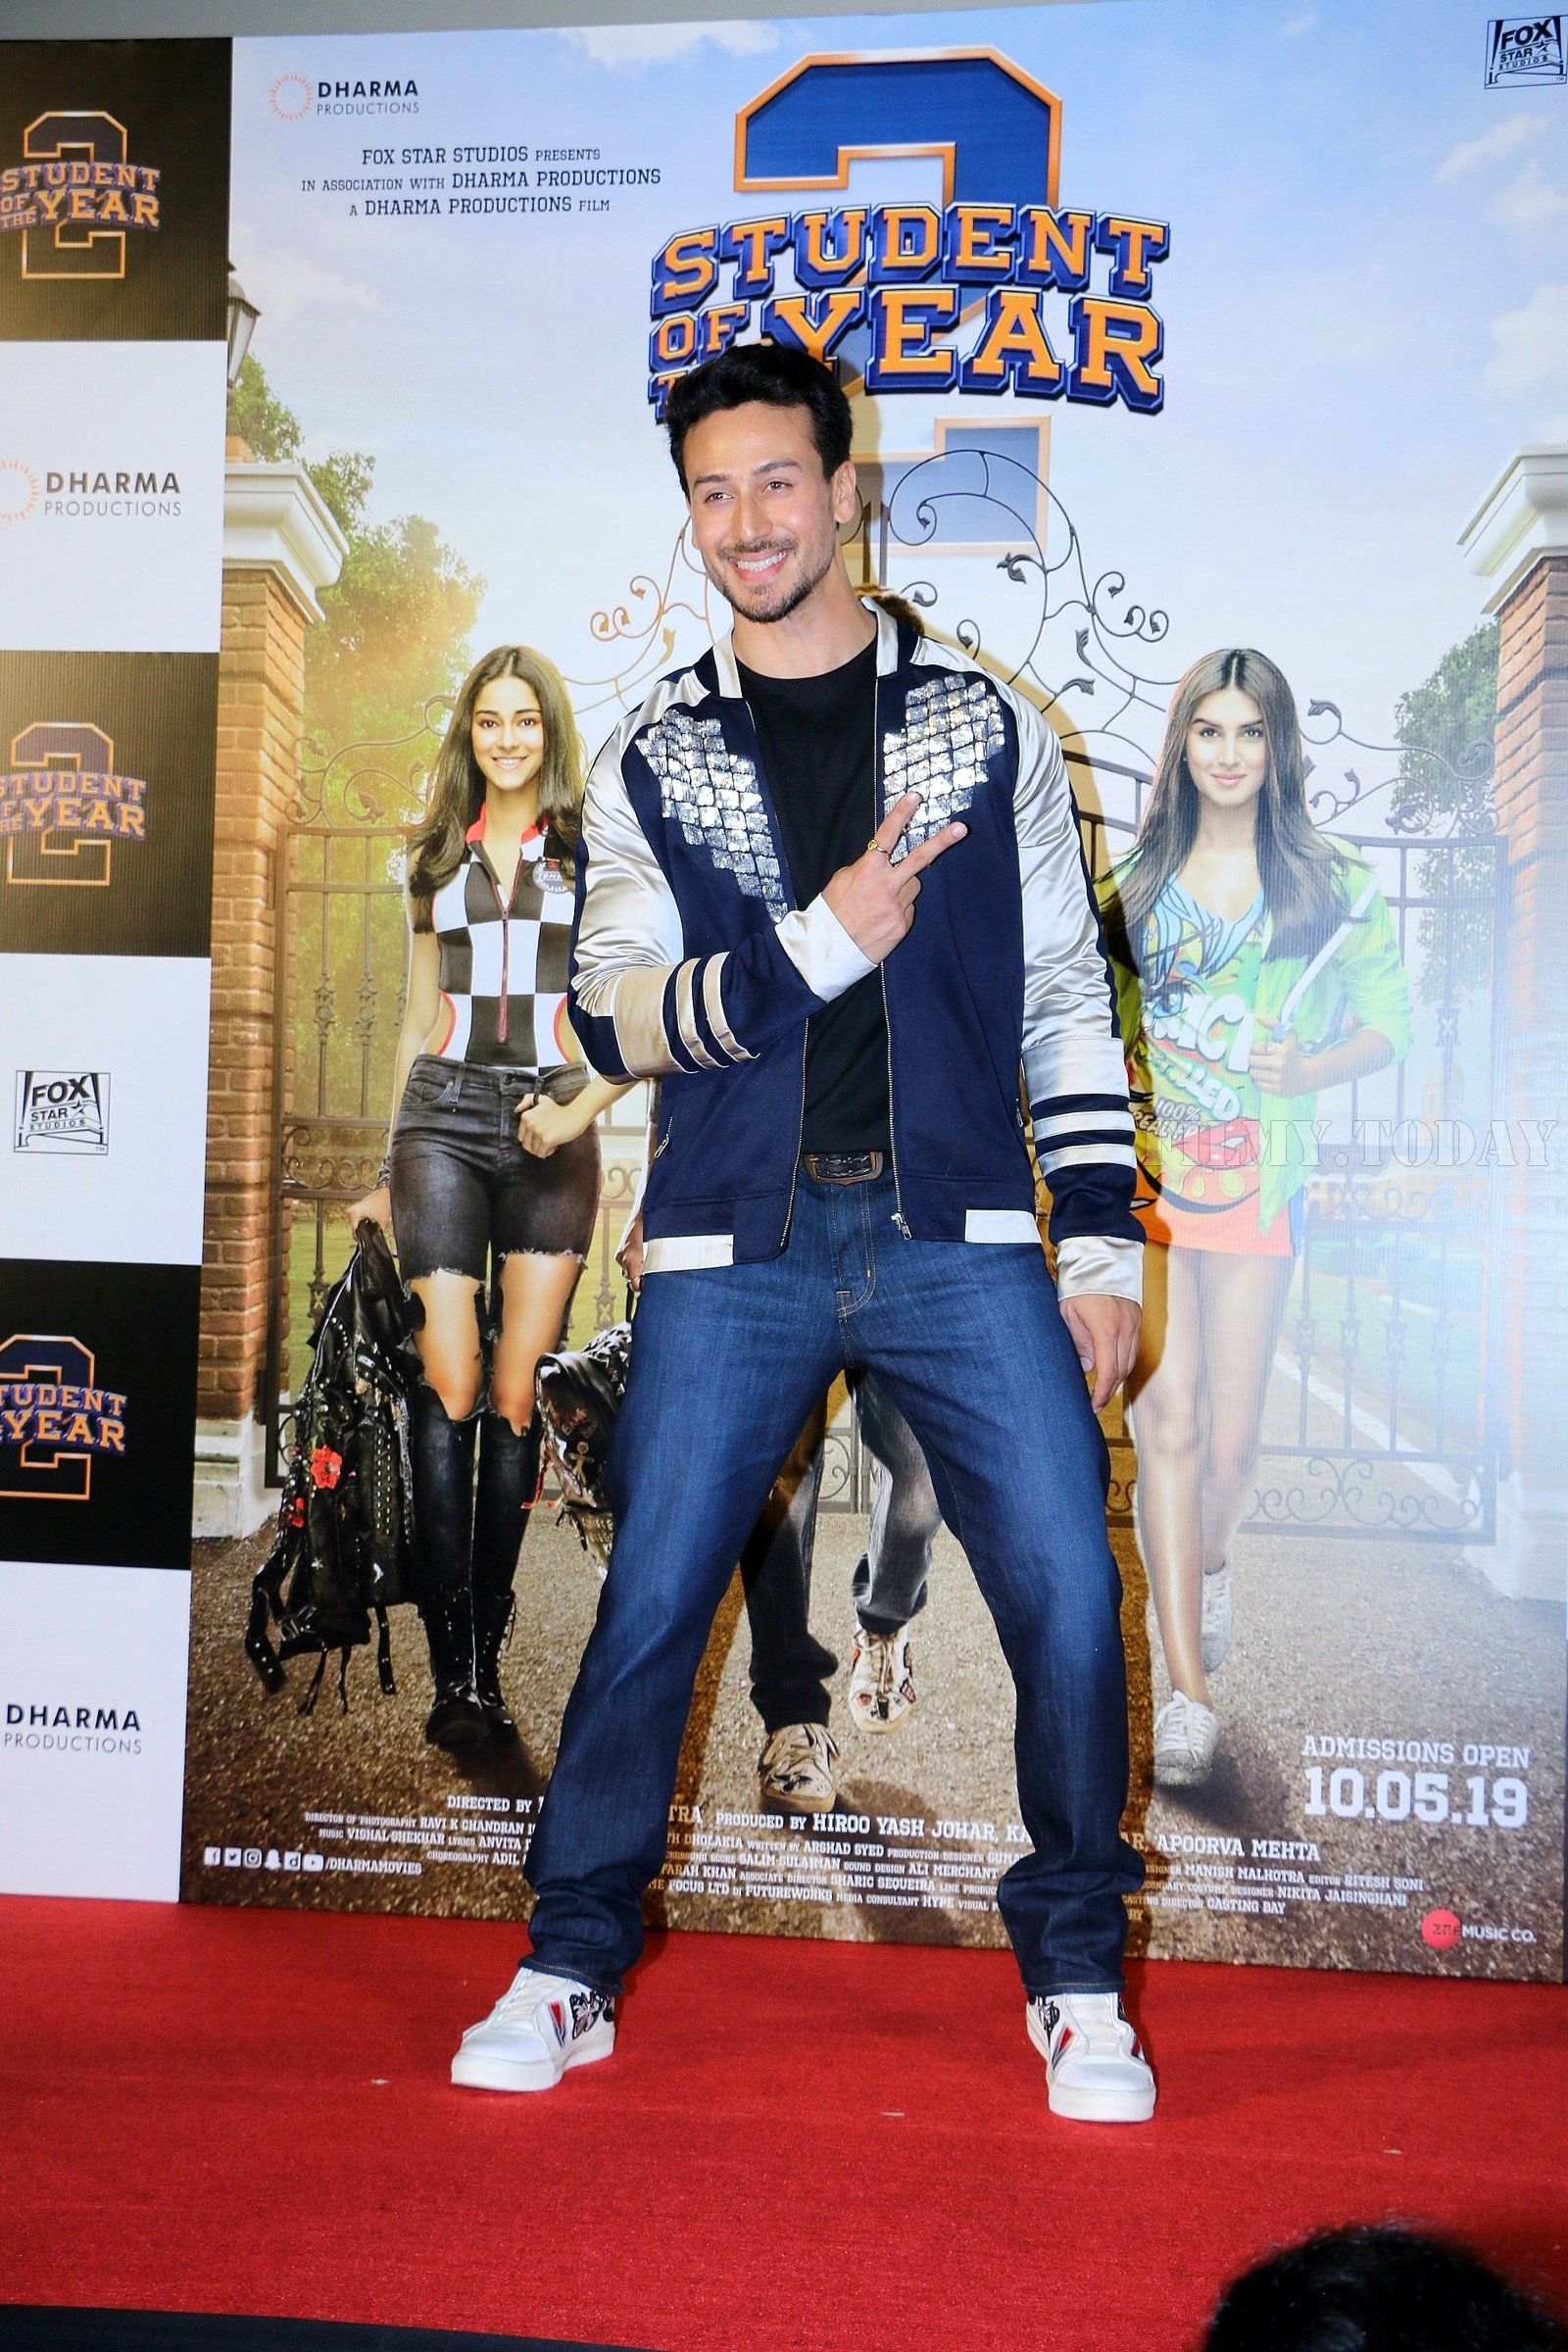 Tiger Shroff - Photos: Trailer Launch Of Film Student Of The Year 2 at PVR | Picture 1642121